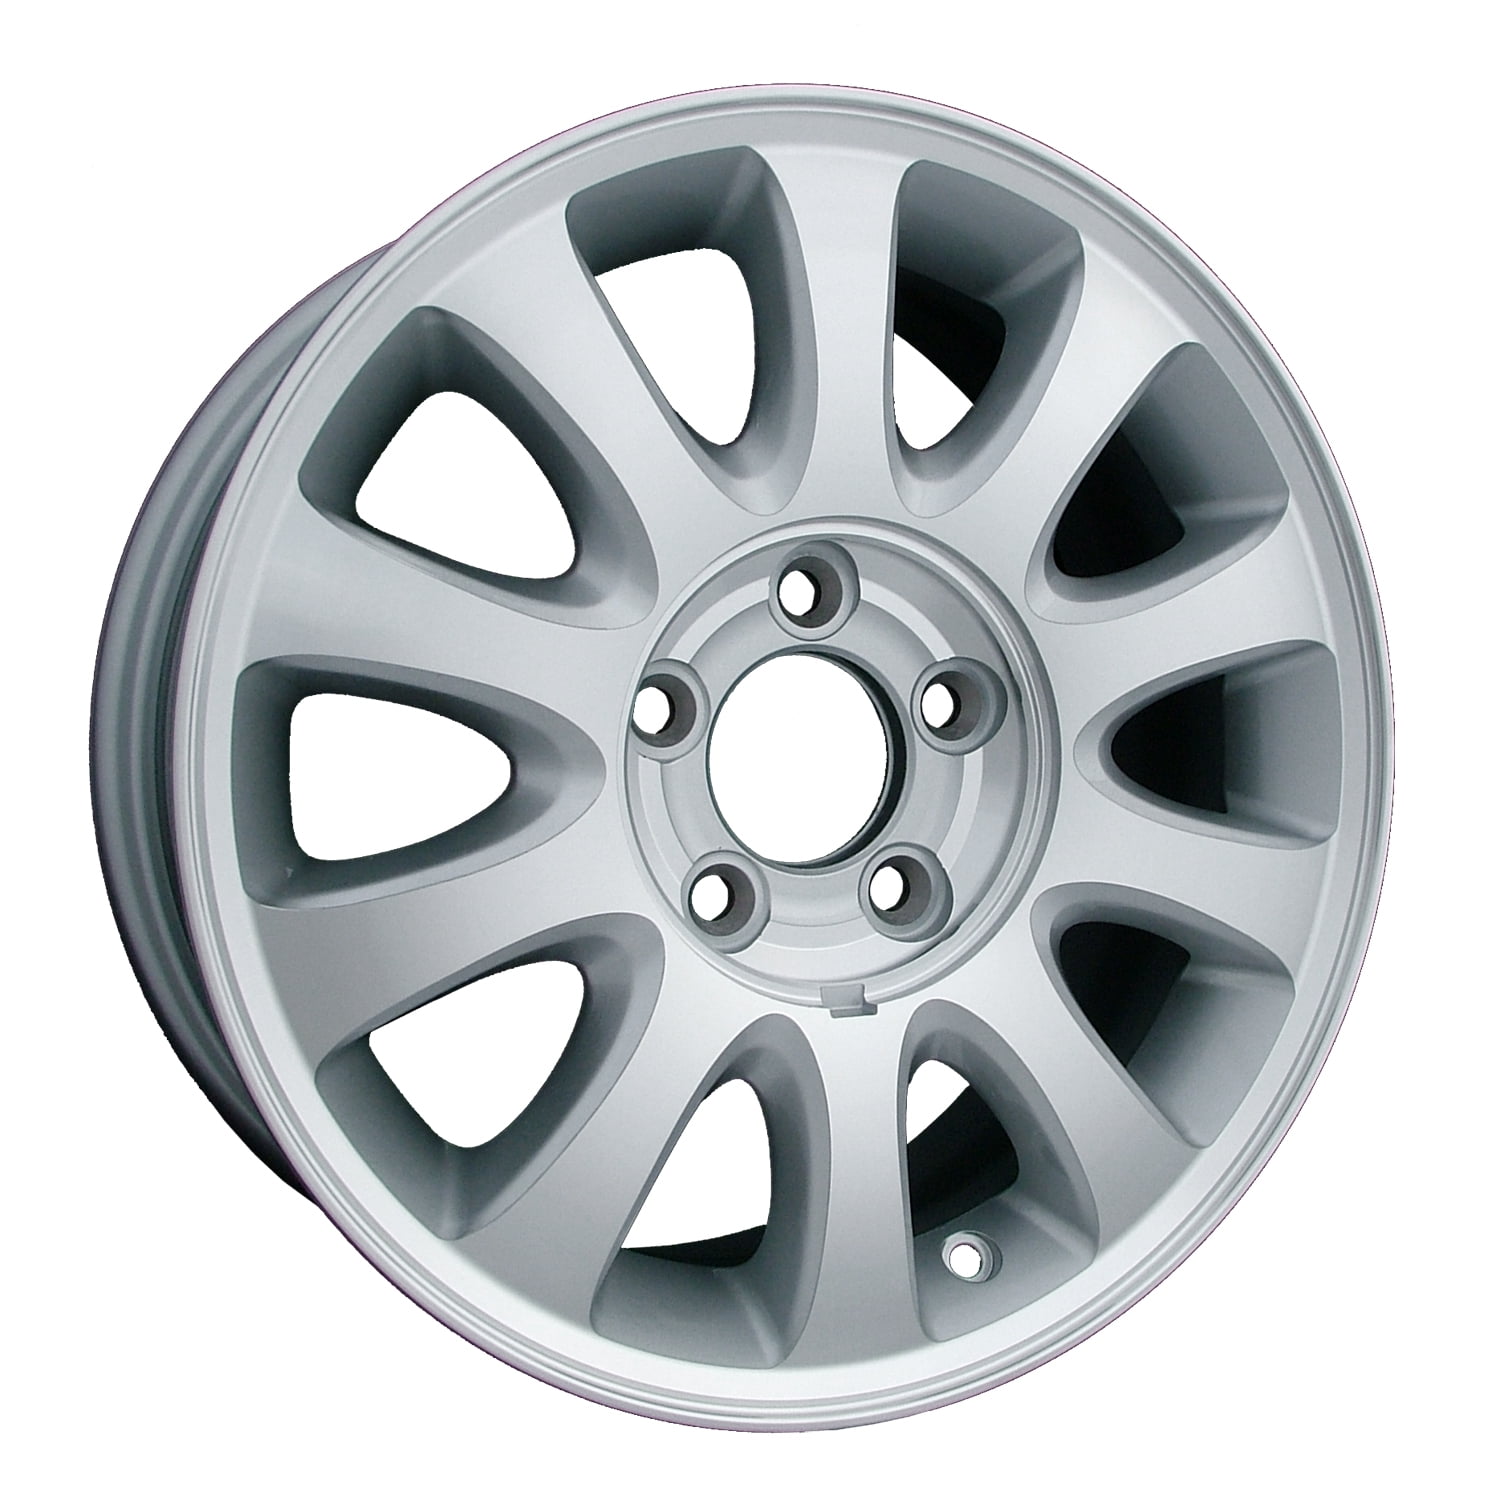 Aftermarket 2001-2003 Chrysler Town & Country 16x6.5 Alloy Wheel, Rim Sparkle Silver Painted Tires For 2003 Chrysler Town And Country